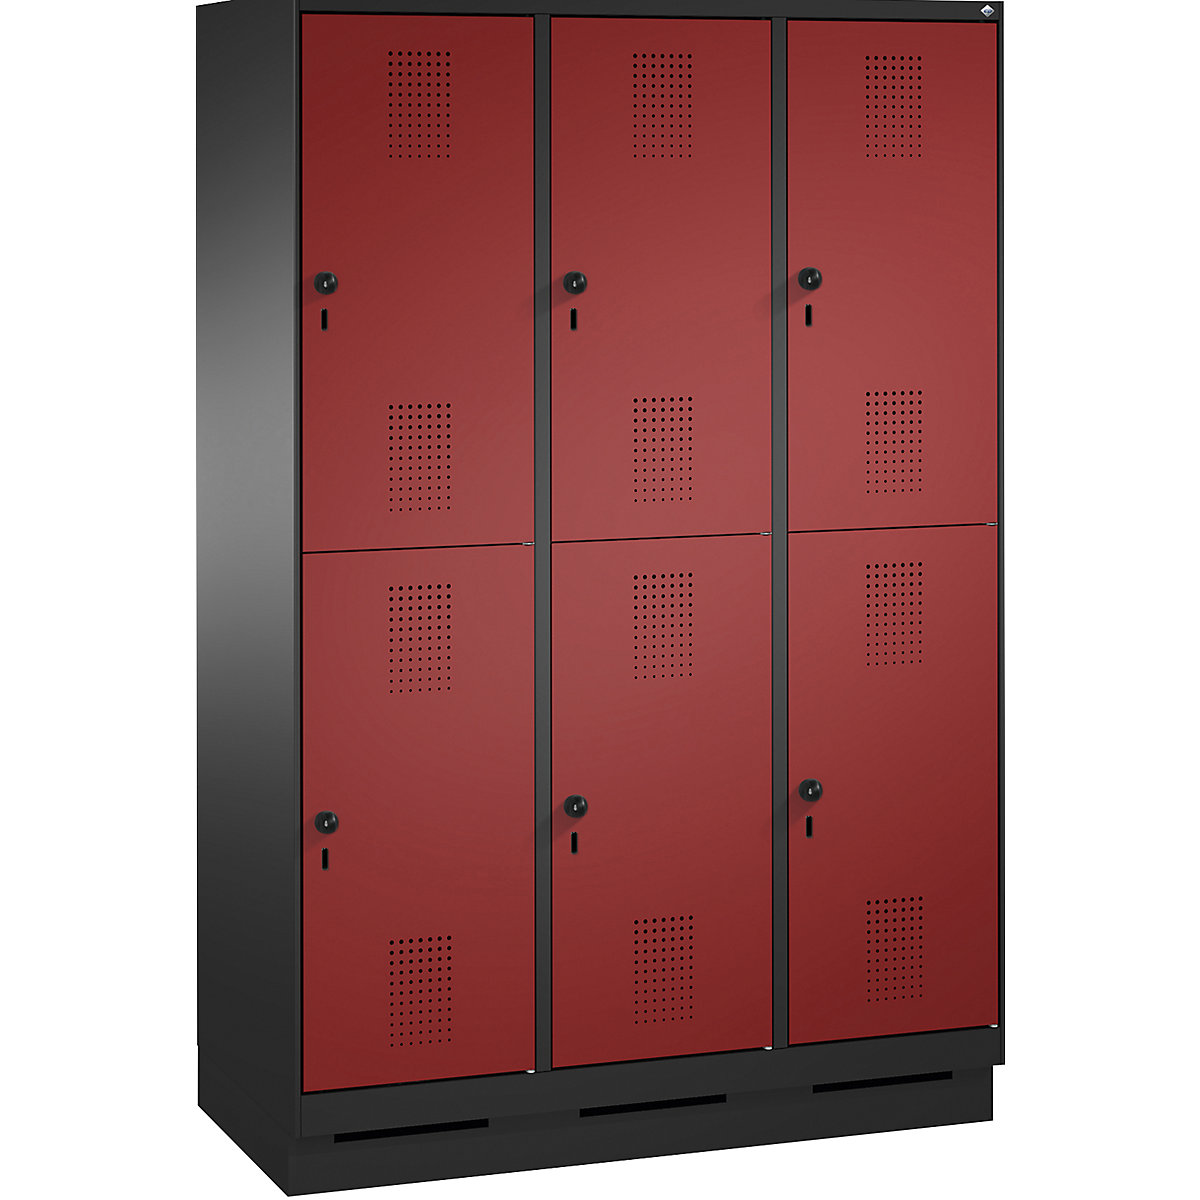 EVOLO cloakroom locker, double tier, with plinth – C+P, 3 compartments, 2 shelf compartments each, compartment width 400 mm, black grey / ruby red-12